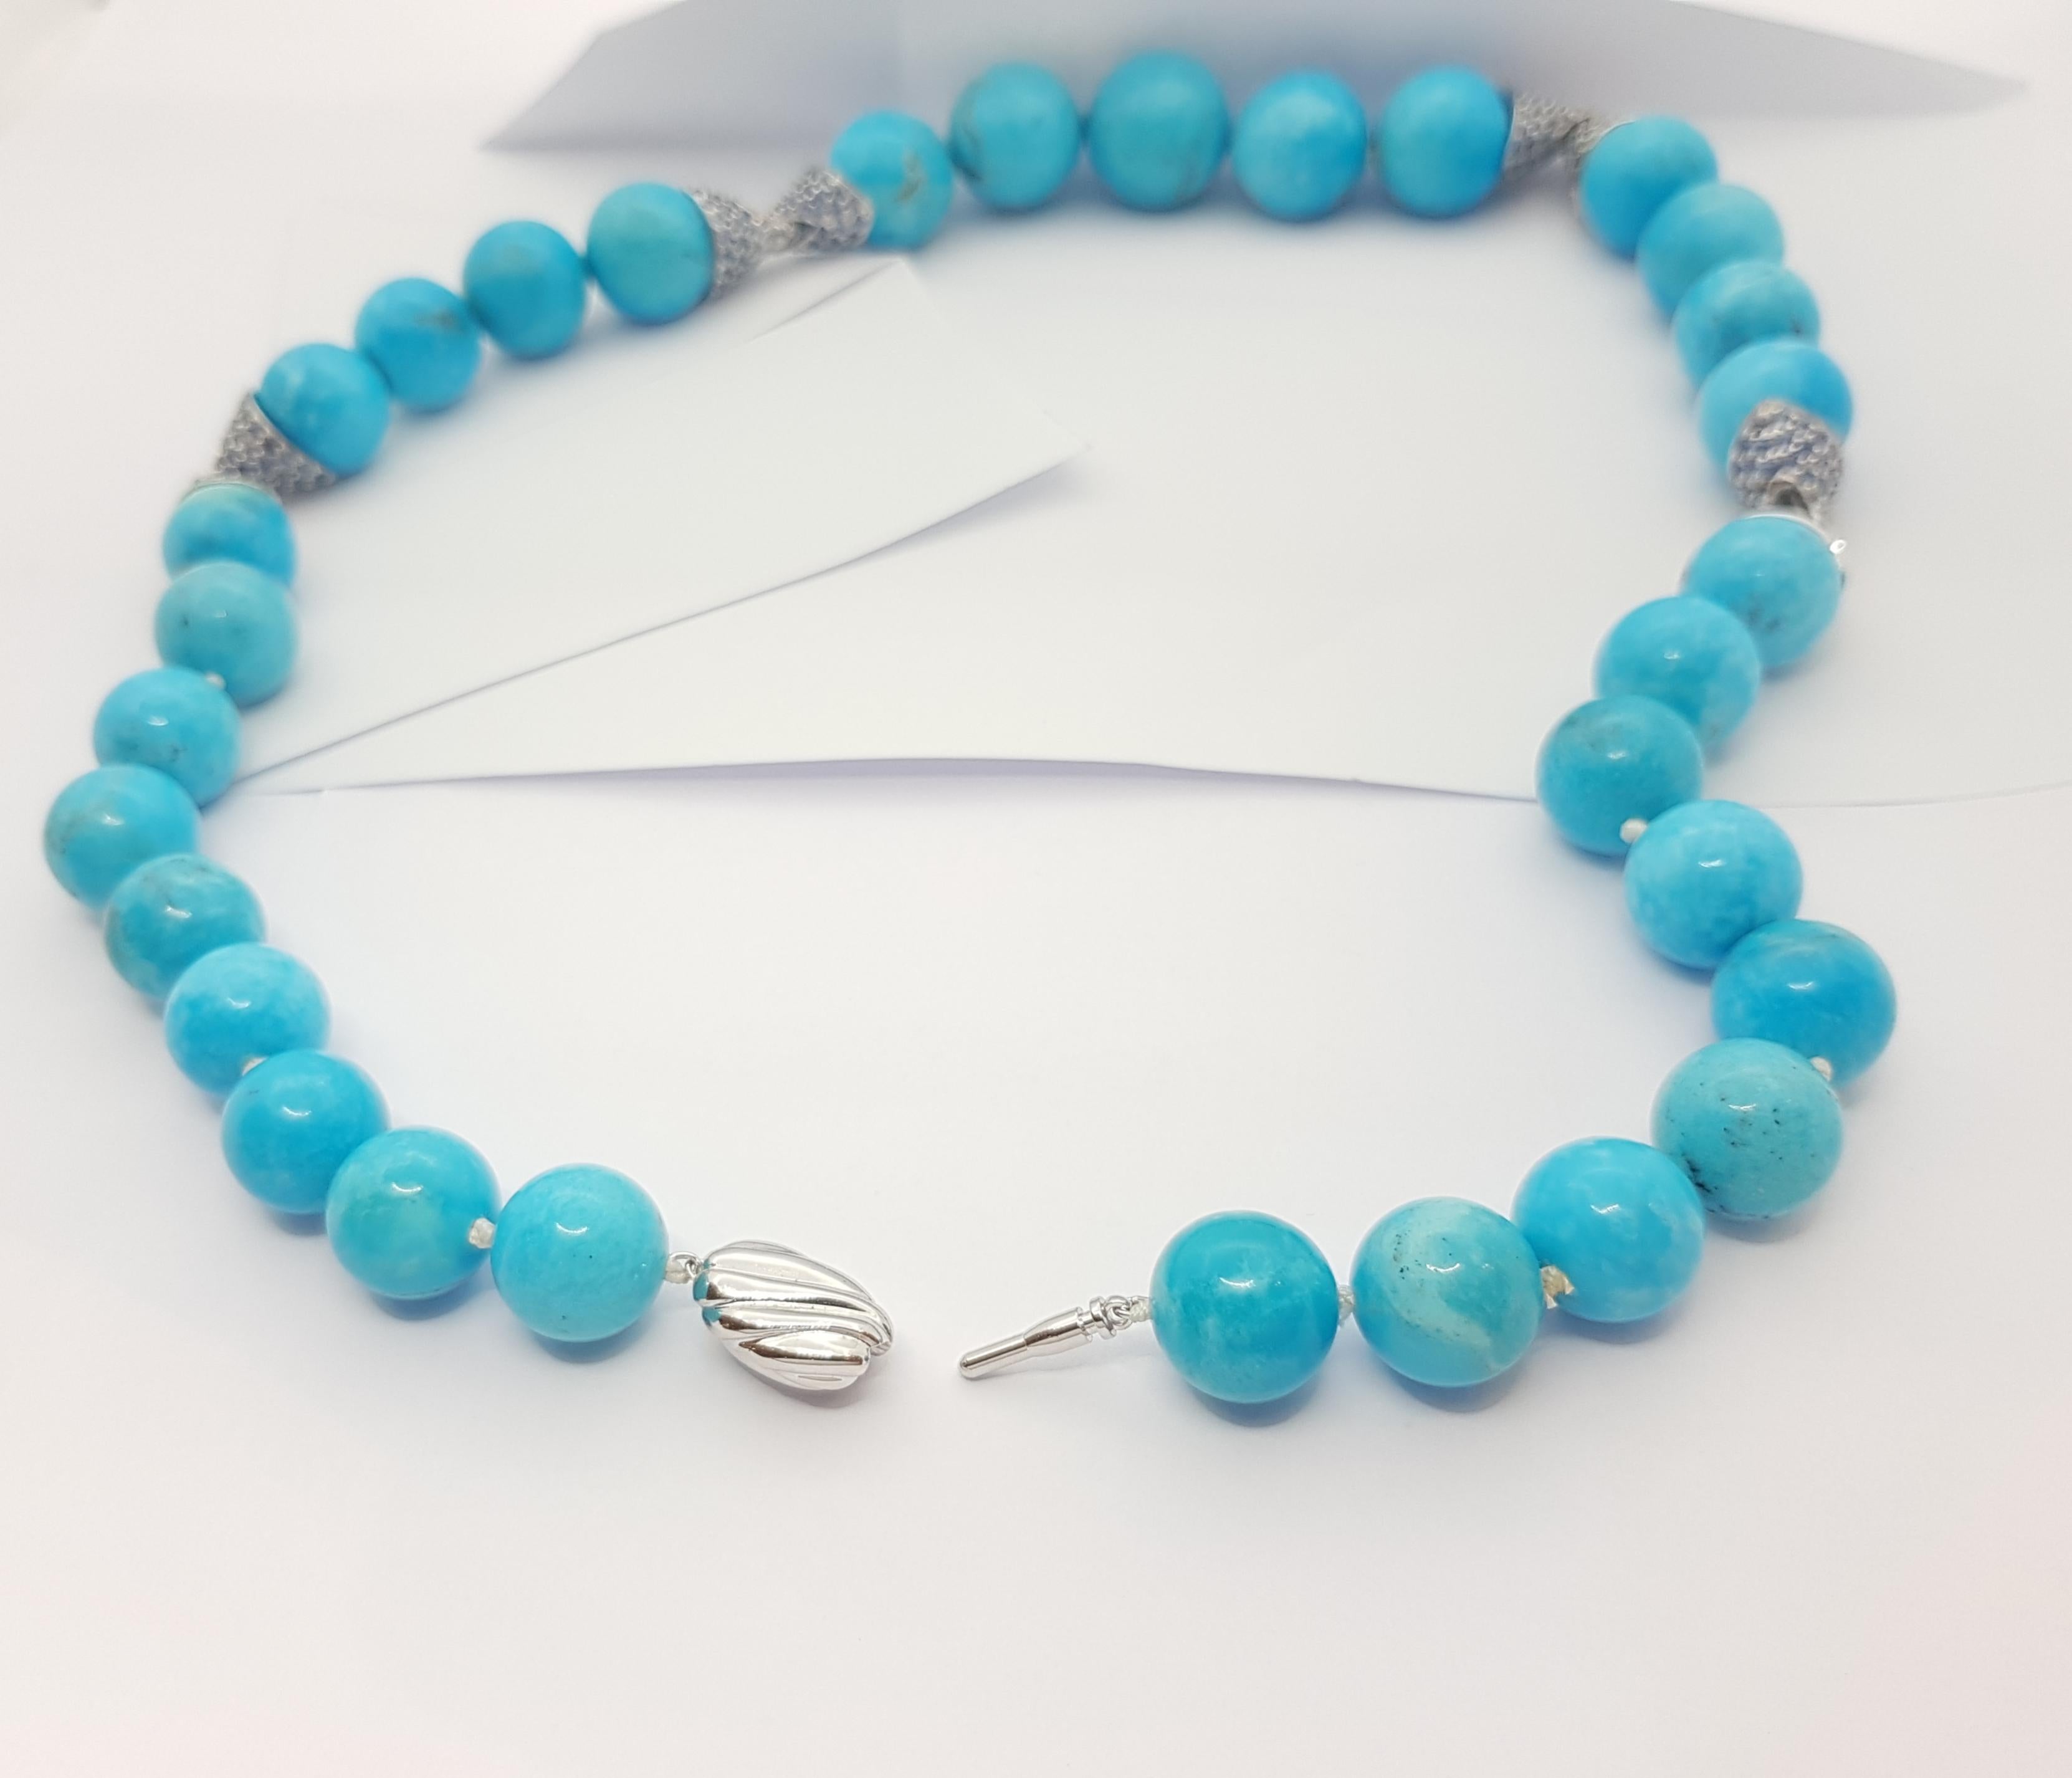 Mixed Cut Turquoise with Blue Sapphire 15.13 carats Necklace set in Silver Settings For Sale